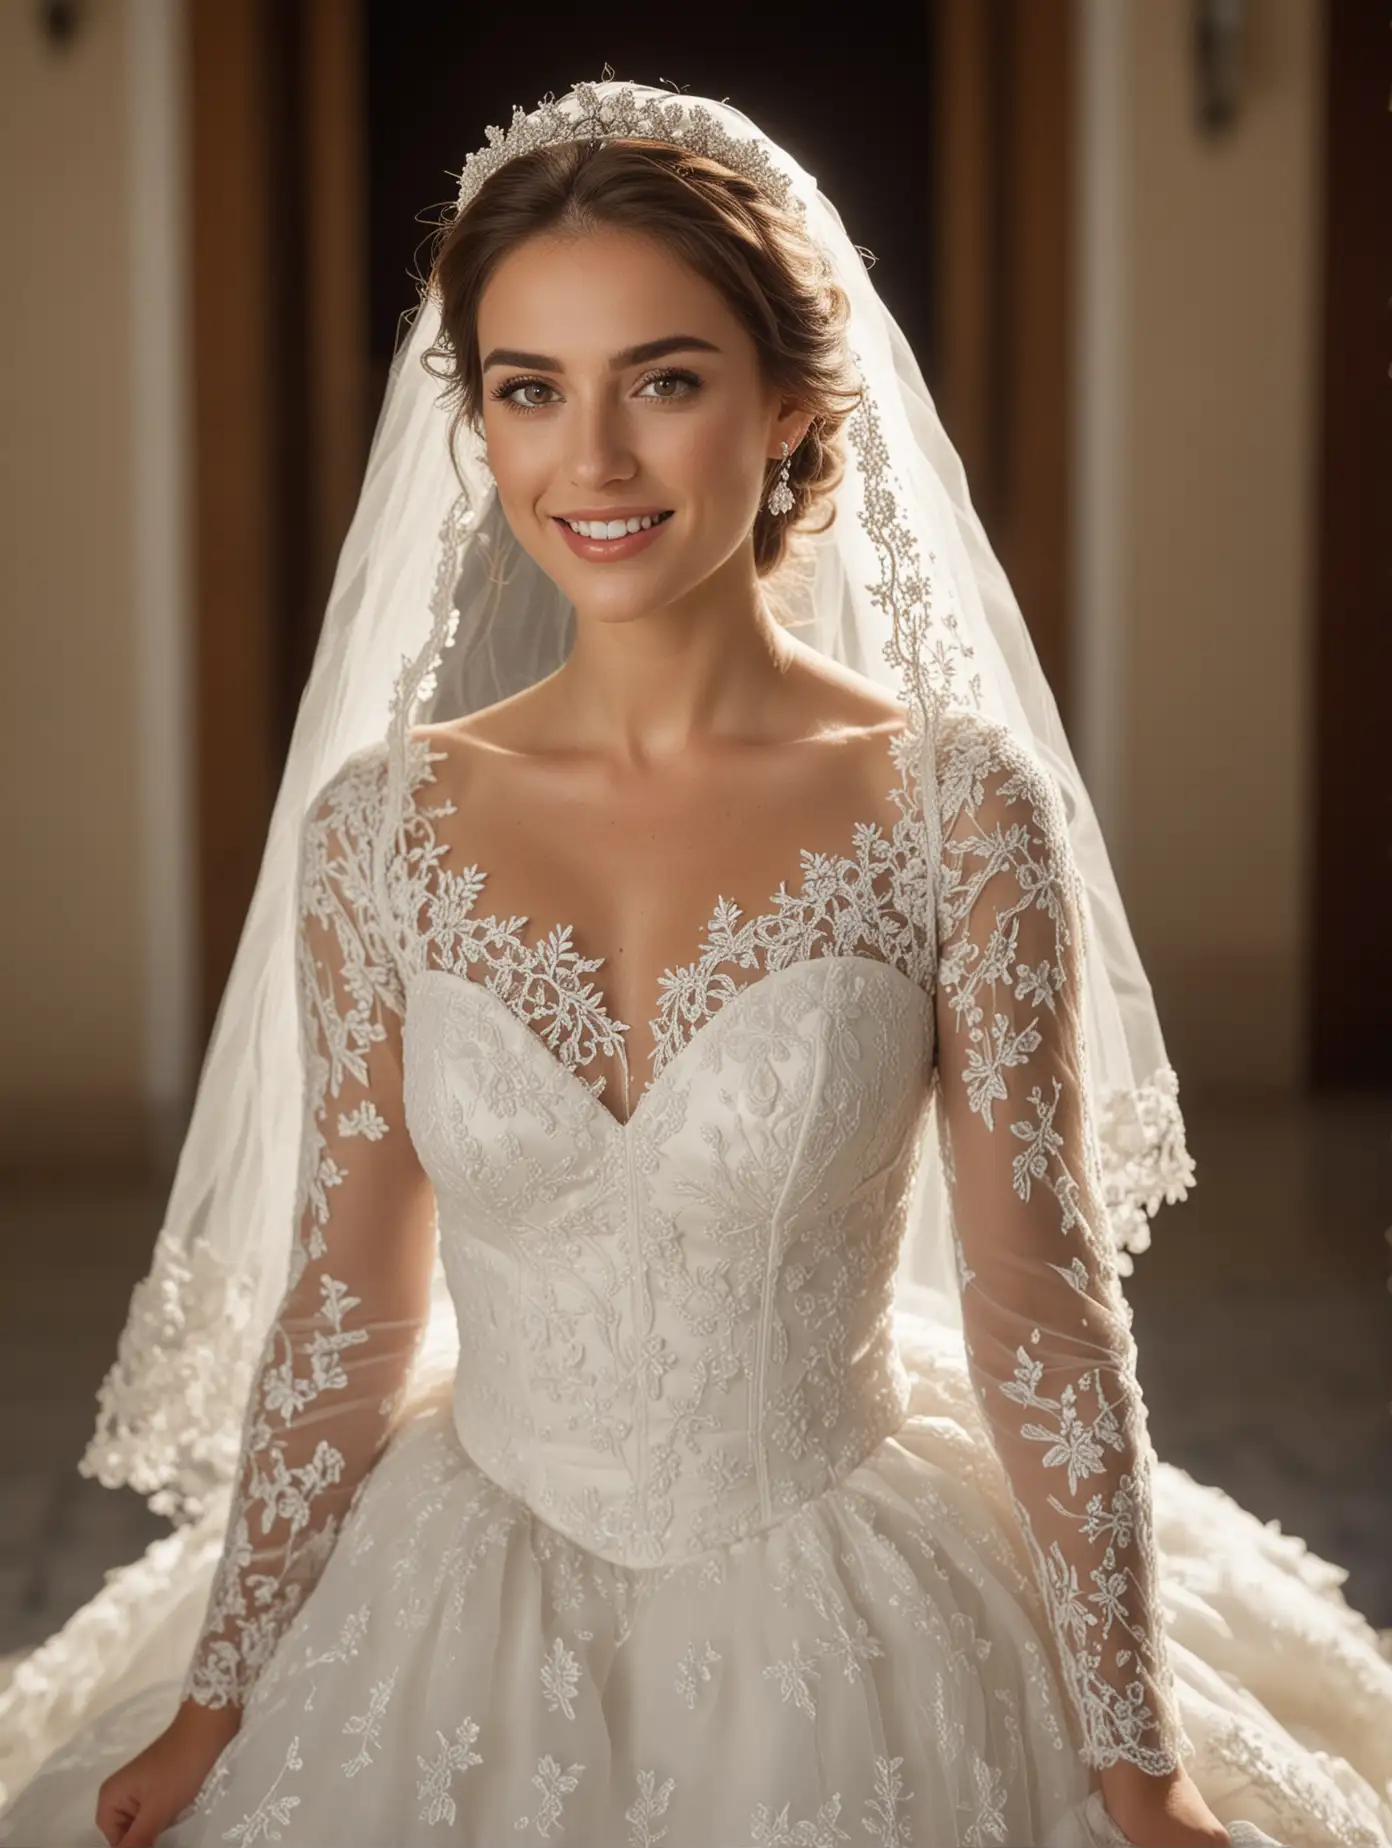 Spain， with neat teeth, the beautiful bride wears a wedding dress and holds flowers. She has elegant makeup, exquisite facial features, professional photography effects, and a face that glows with joy. Her gown was veiled and featured delicate lace details and a tulle skirt，full-body shot